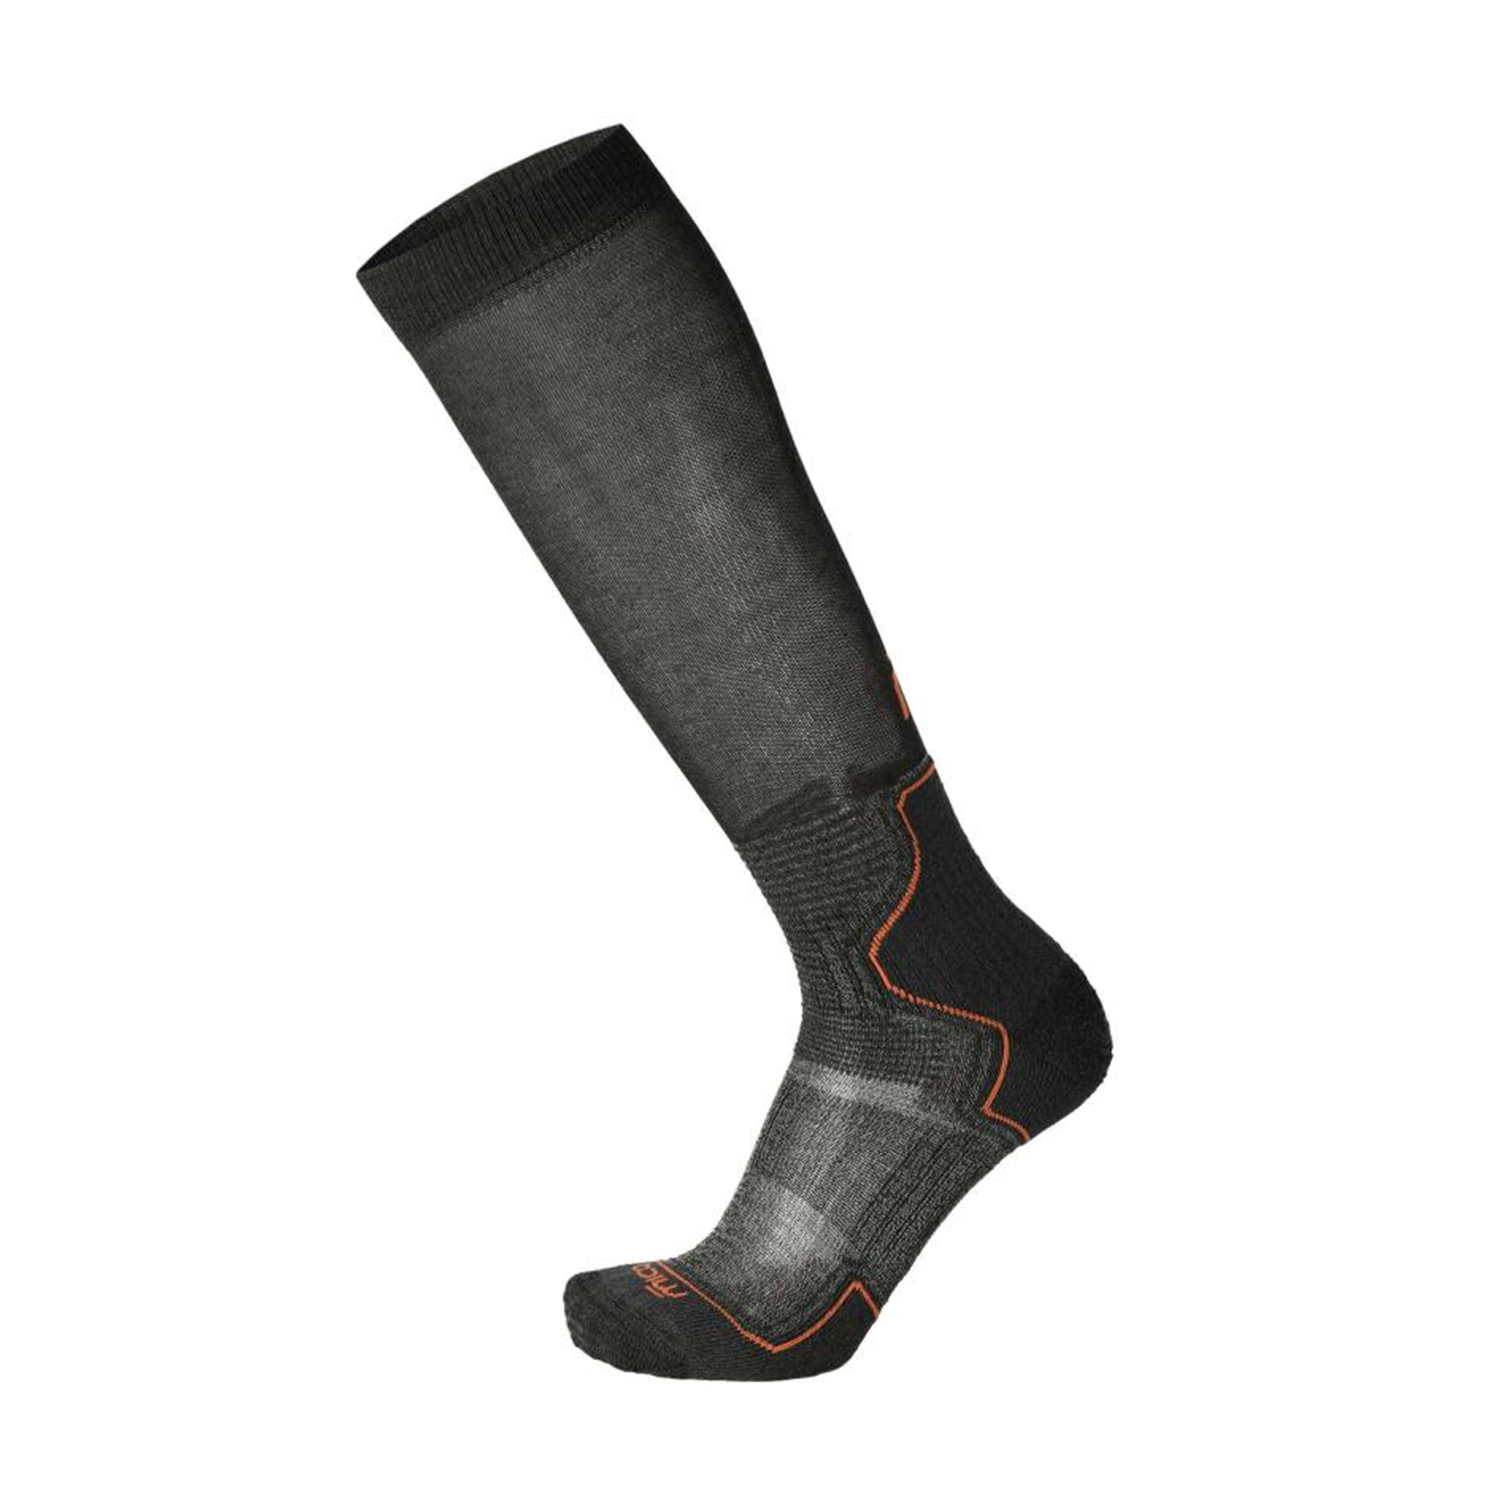 Mico Extra Dry Protech Light Weight Socks - Antracite Melange